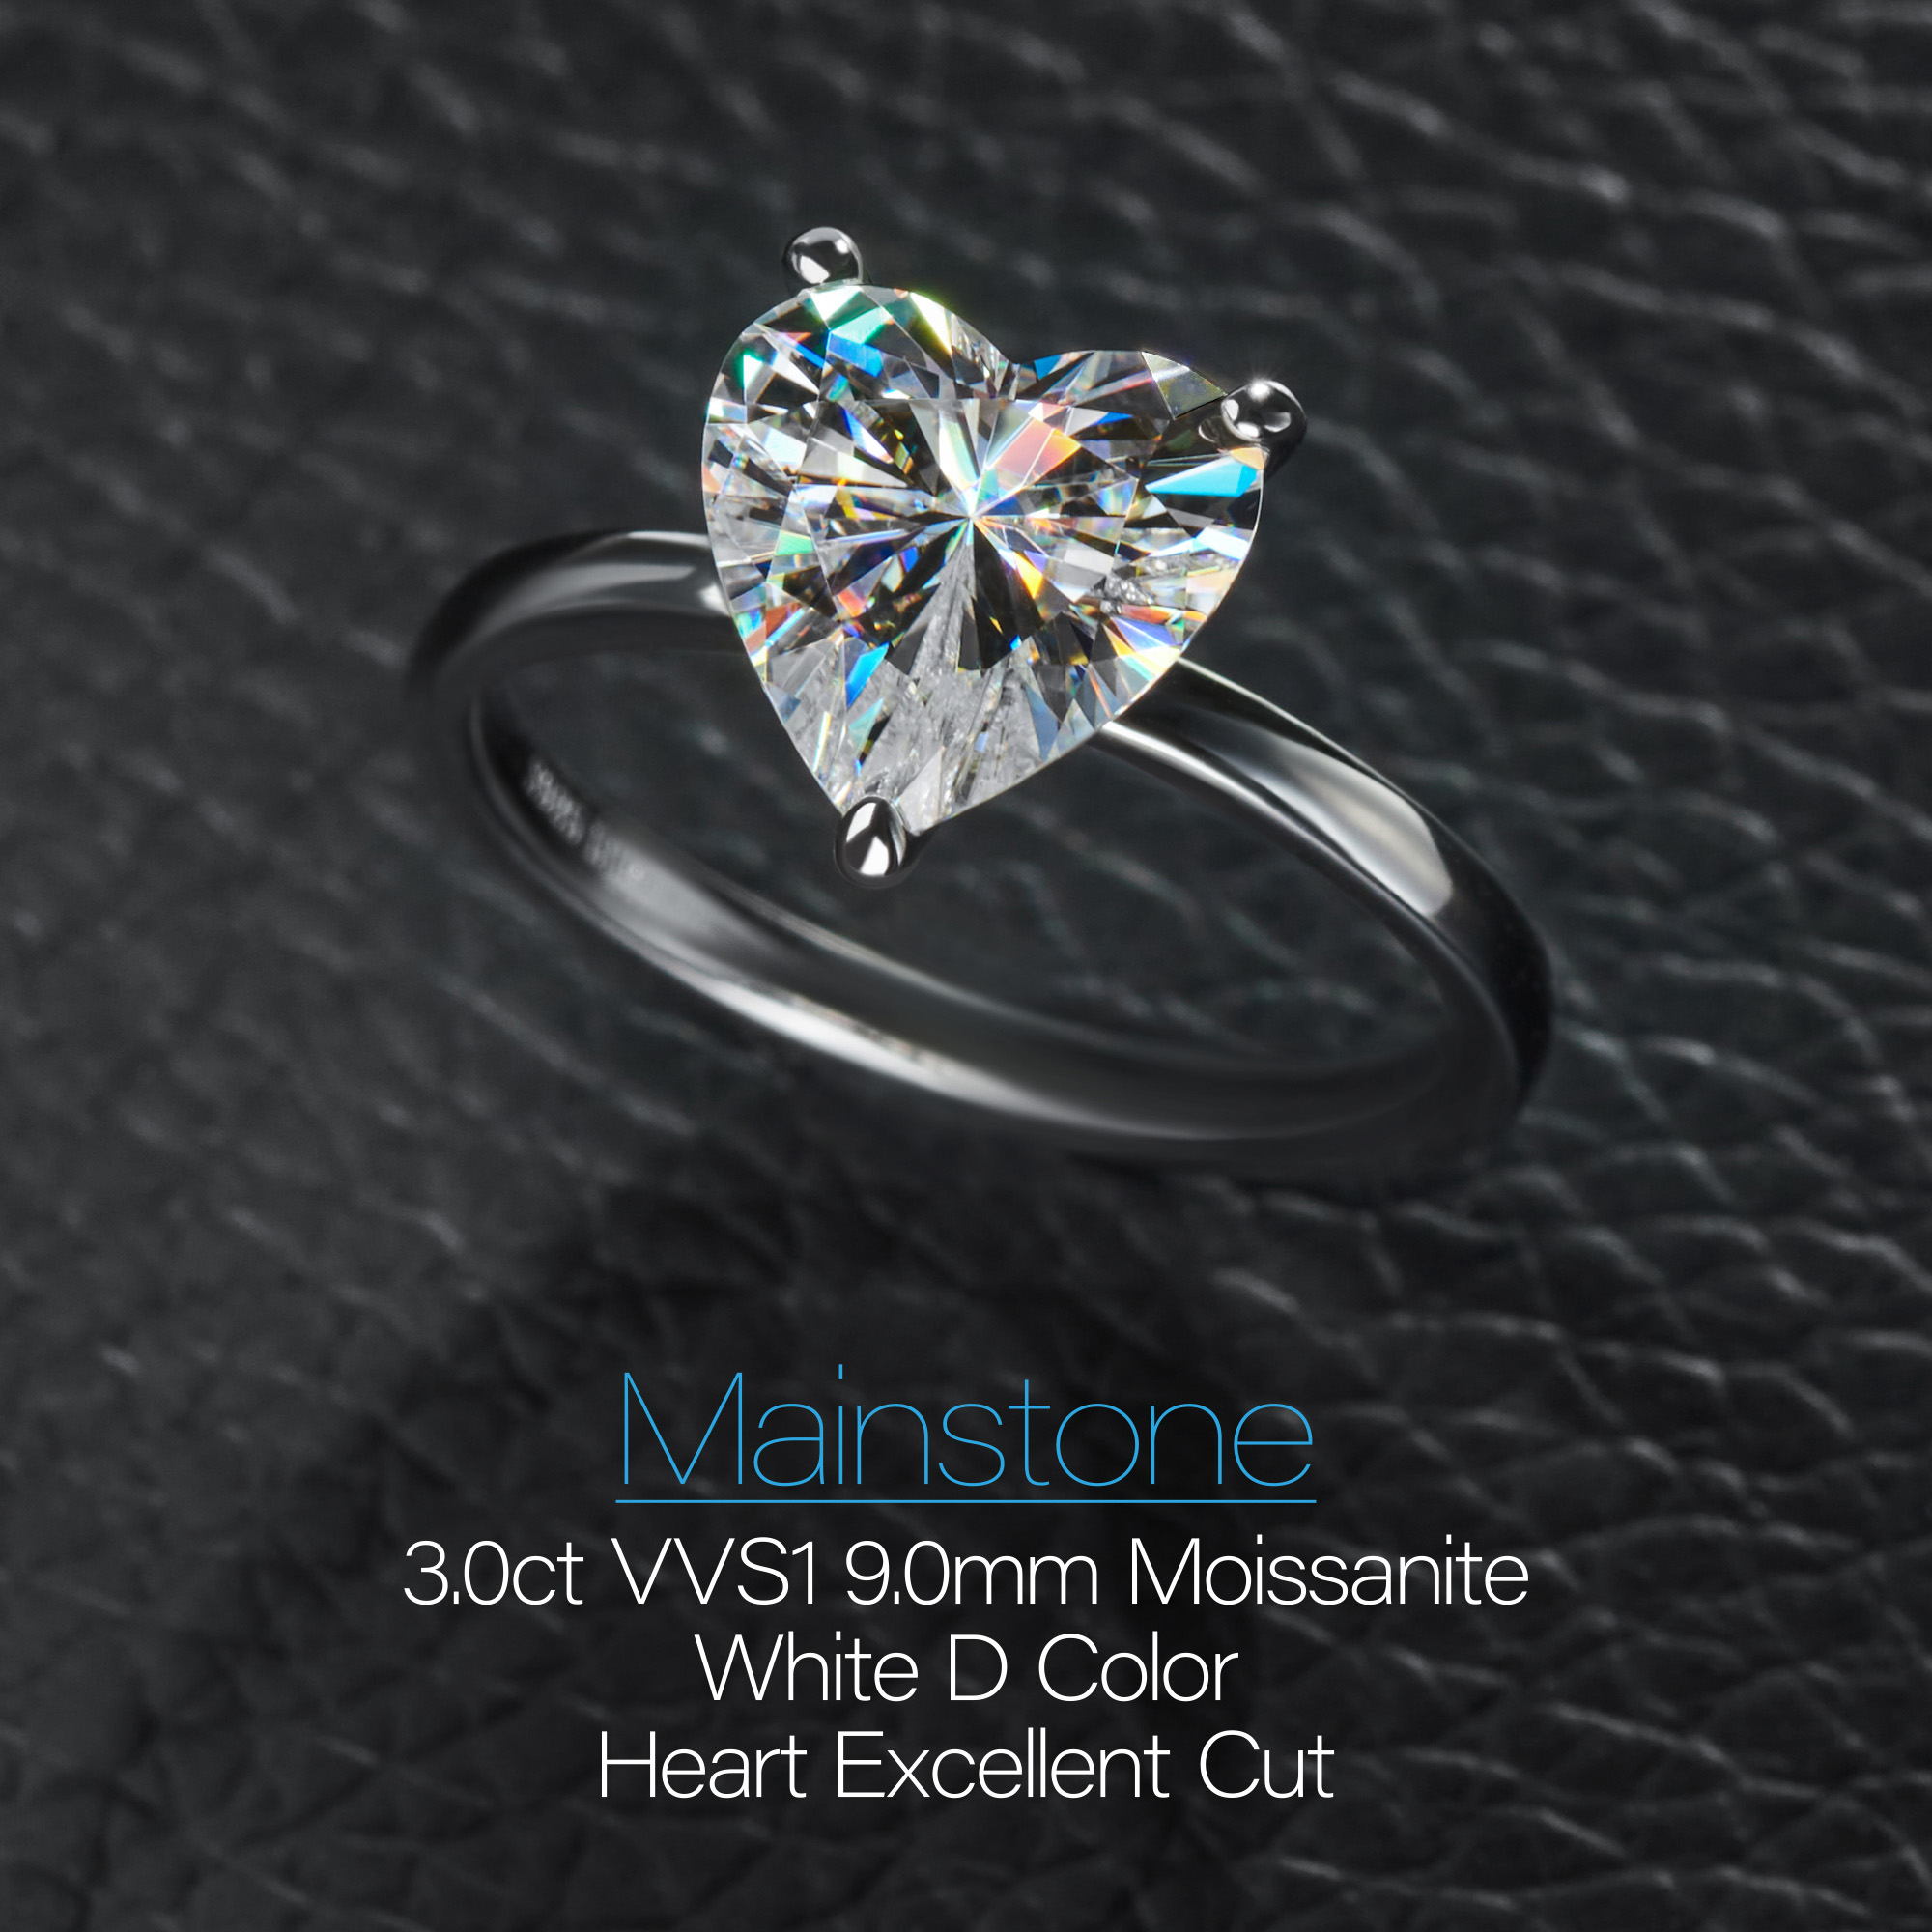 GIGAJEWE - 9.0 Silver Ring with Moissanite, 925mm, White D Color, VVS1, Cut Heart, Diamond Tested, Simple Style, Gift for Women and Girls